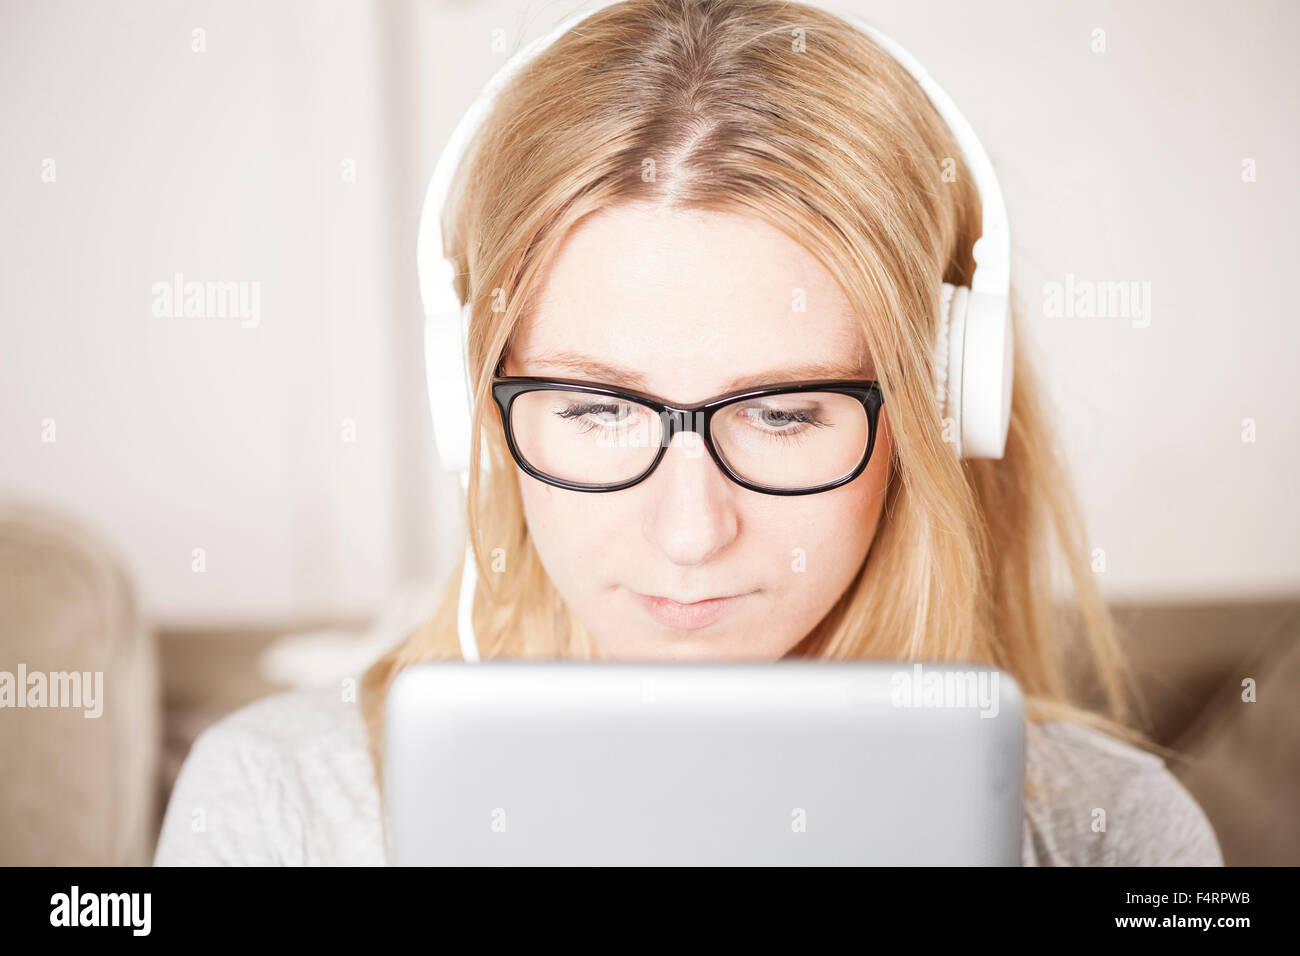 blond woman listening to music and looking at tablet computer Stock Photo